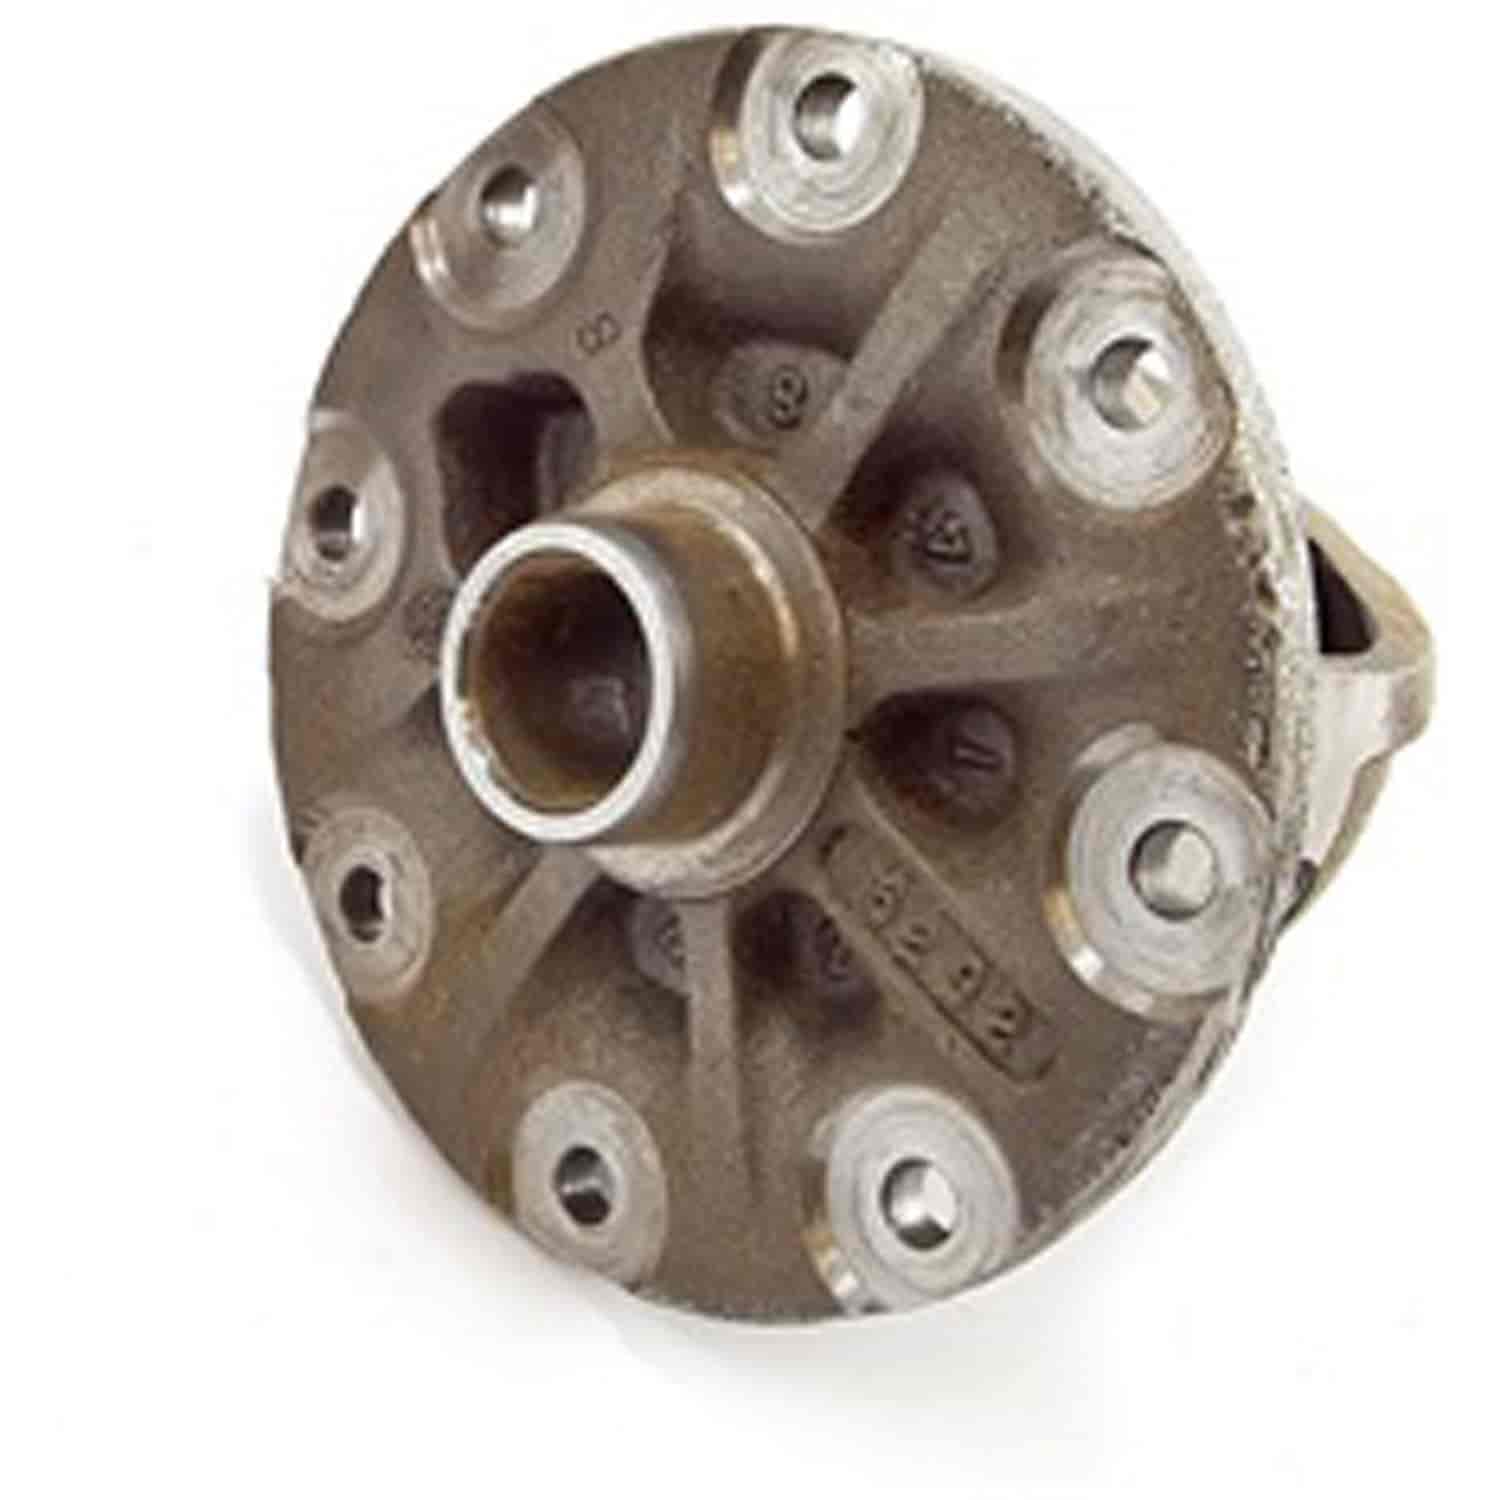 This differential carrier from Omix-ADA is for Dana 35s with 2.73 to 3.31 ratios in 87-04 Jeep vehicles.